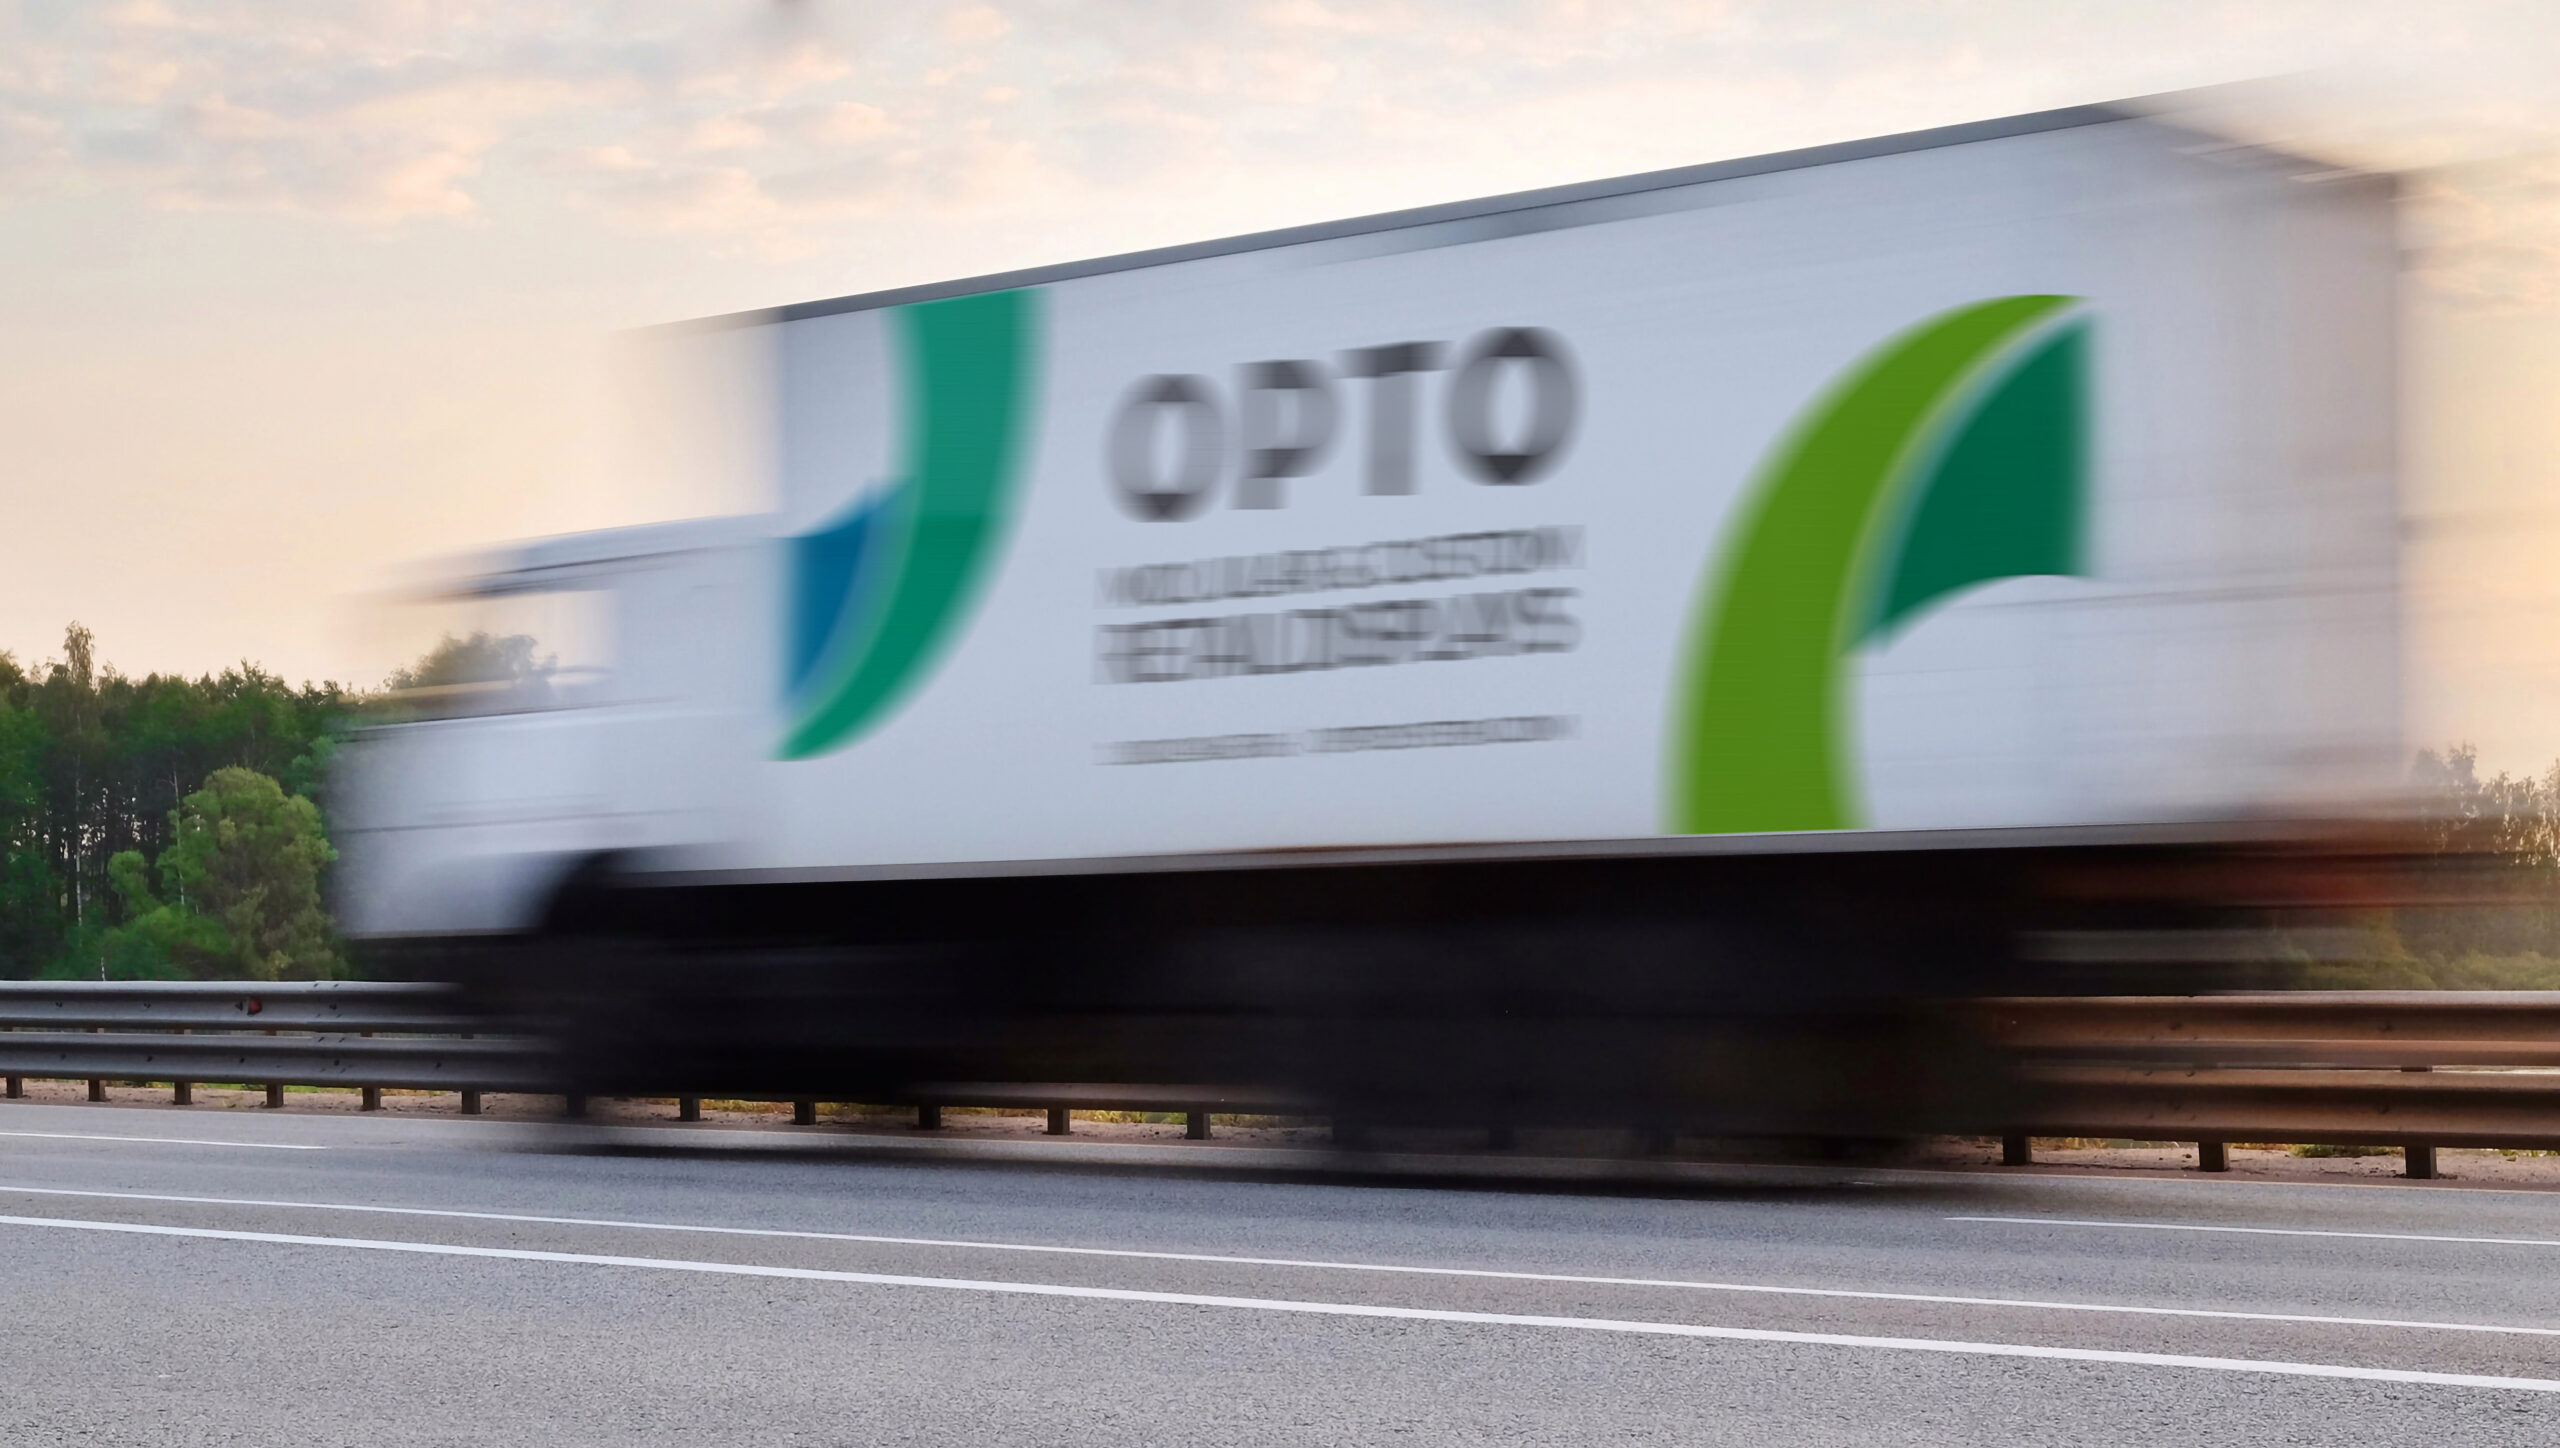 the image of a truck in movement